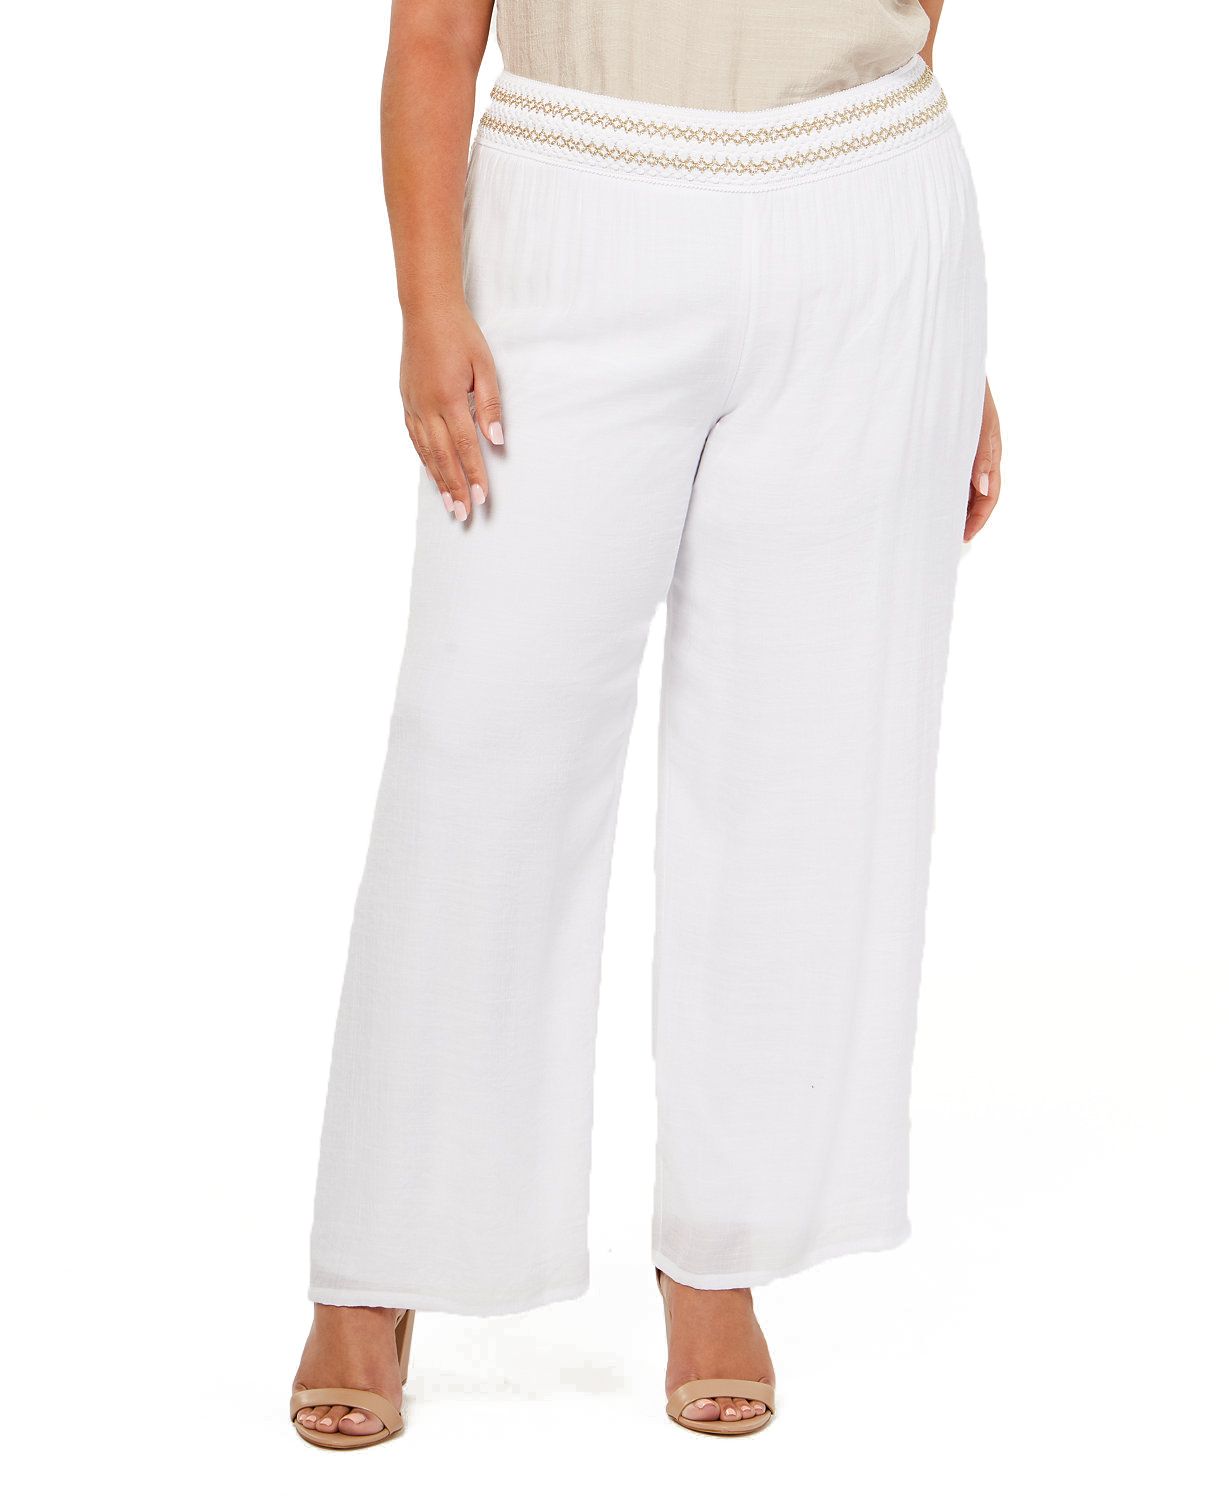 Plus Lined Gauze Pull-On Pants – Online Warehouse Sale